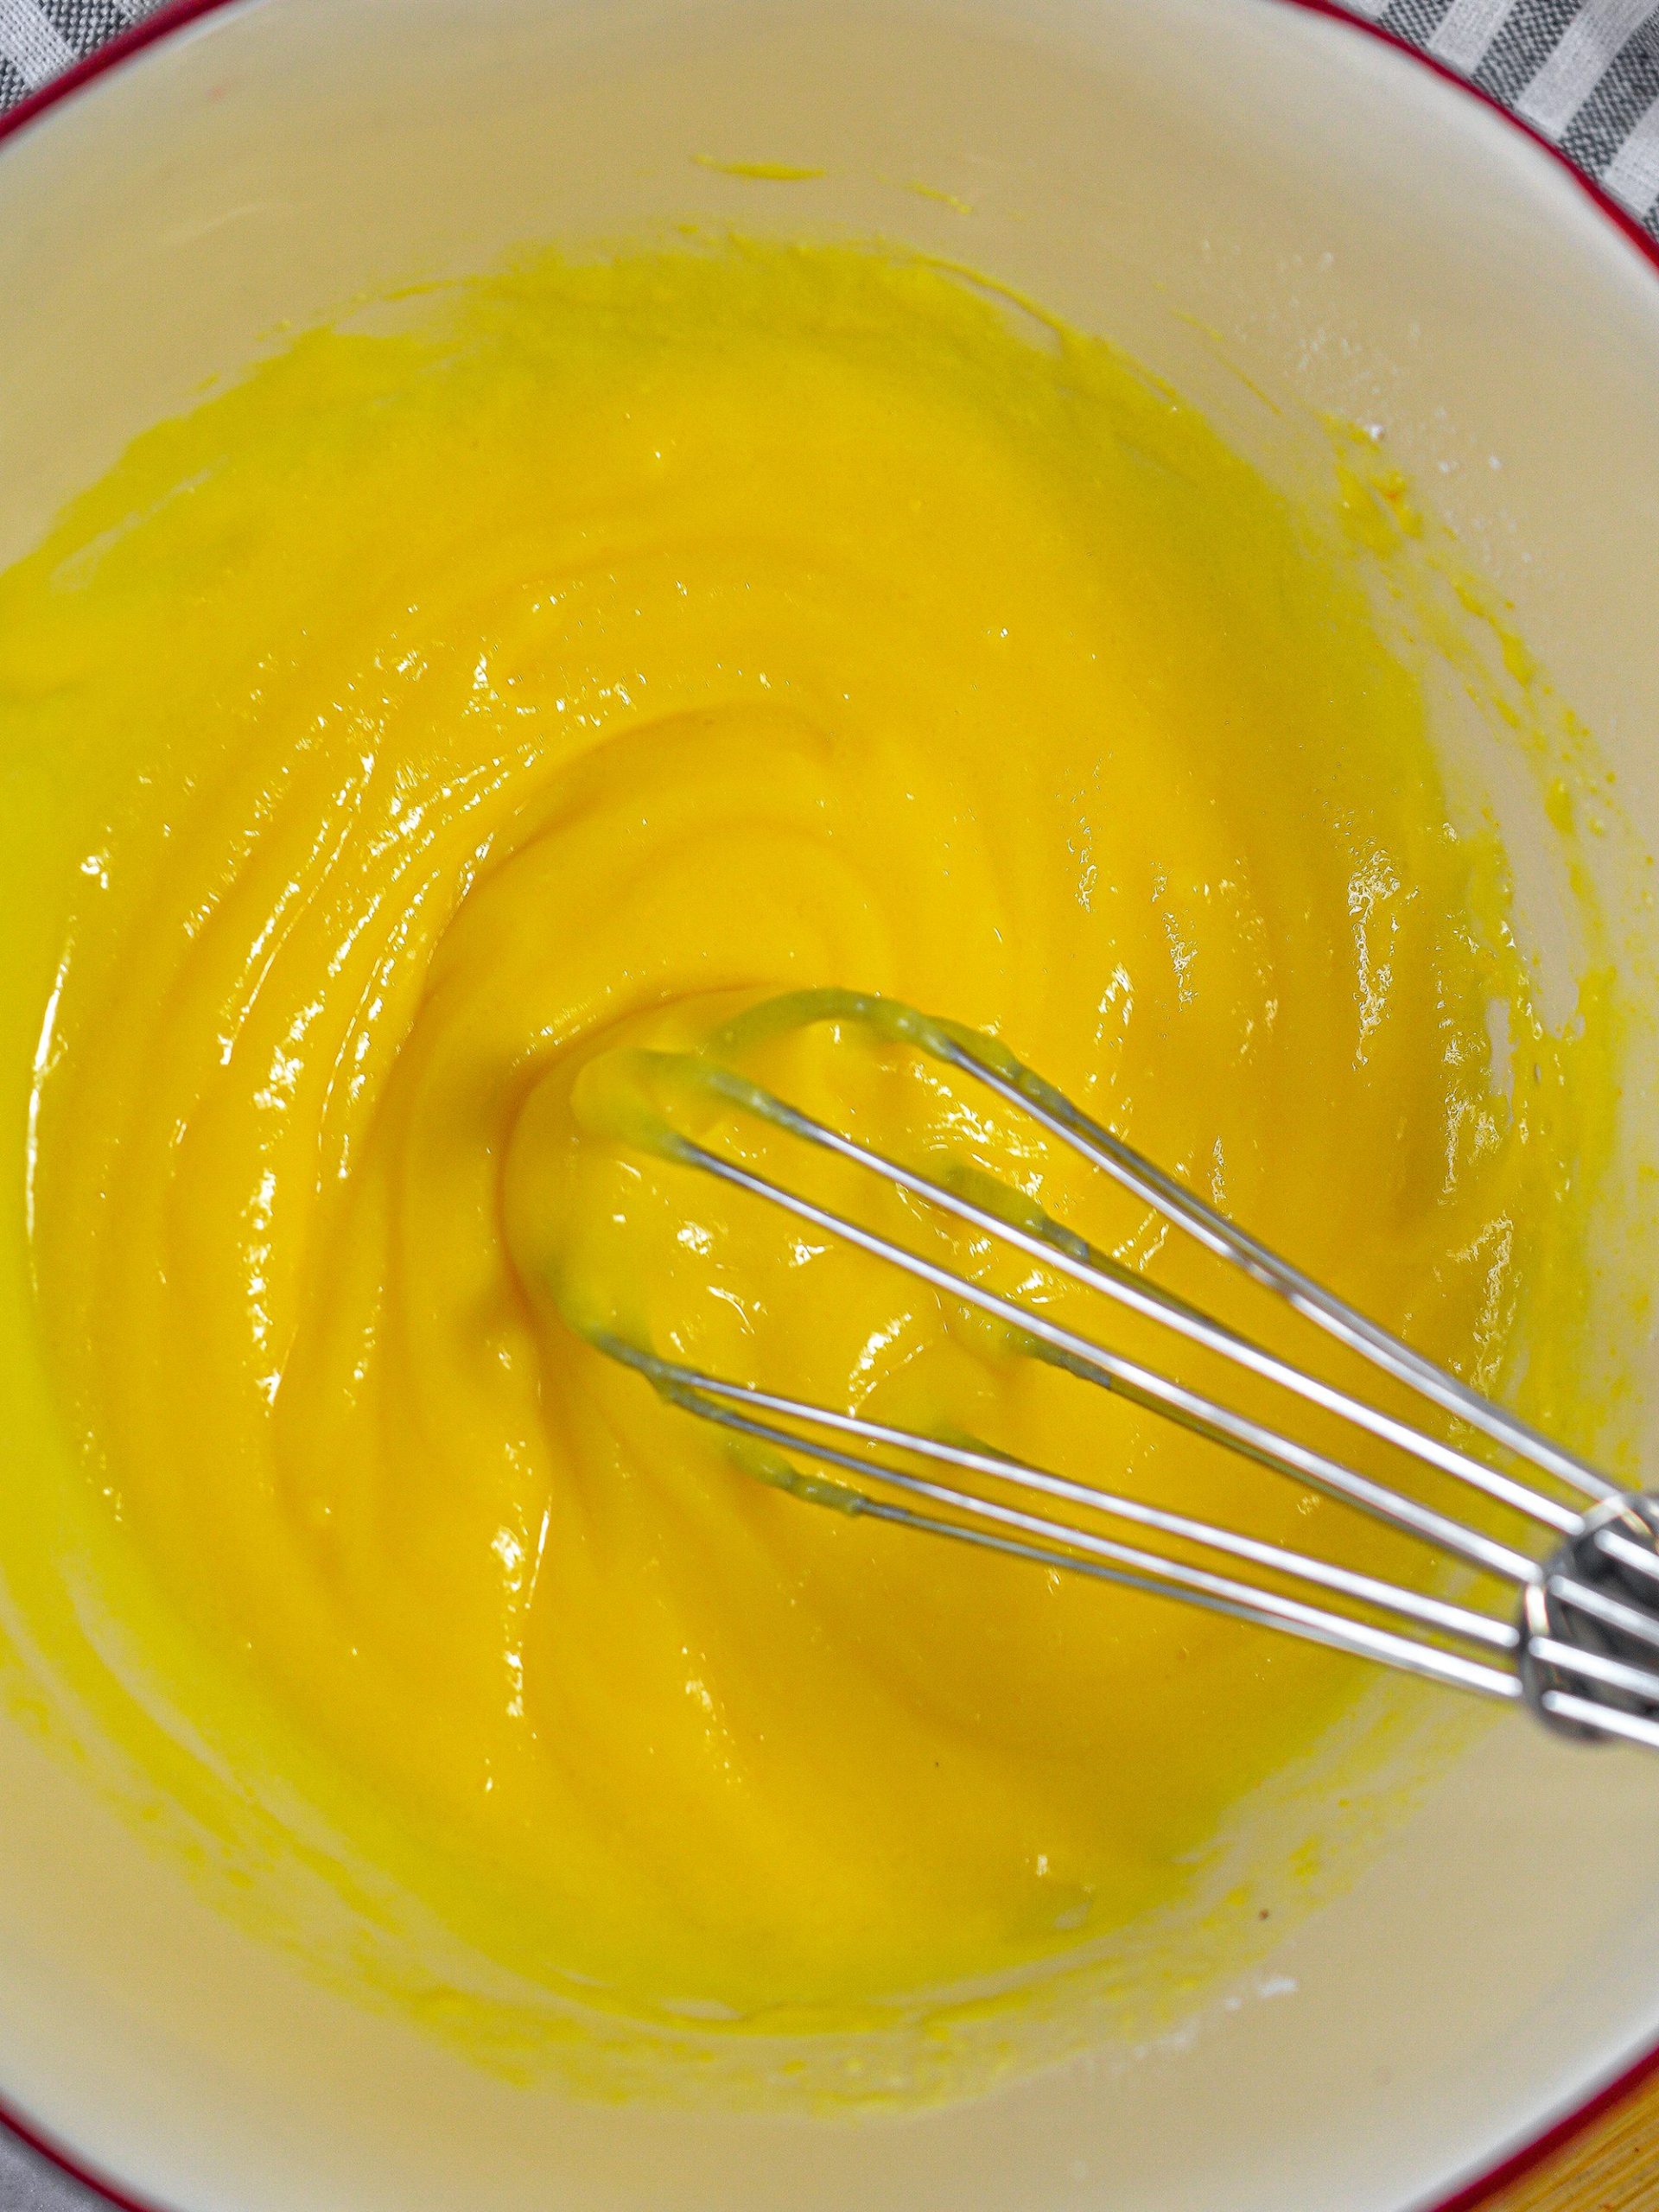 In a separate bowl, whisk together the pudding mix and the mix until smooth.